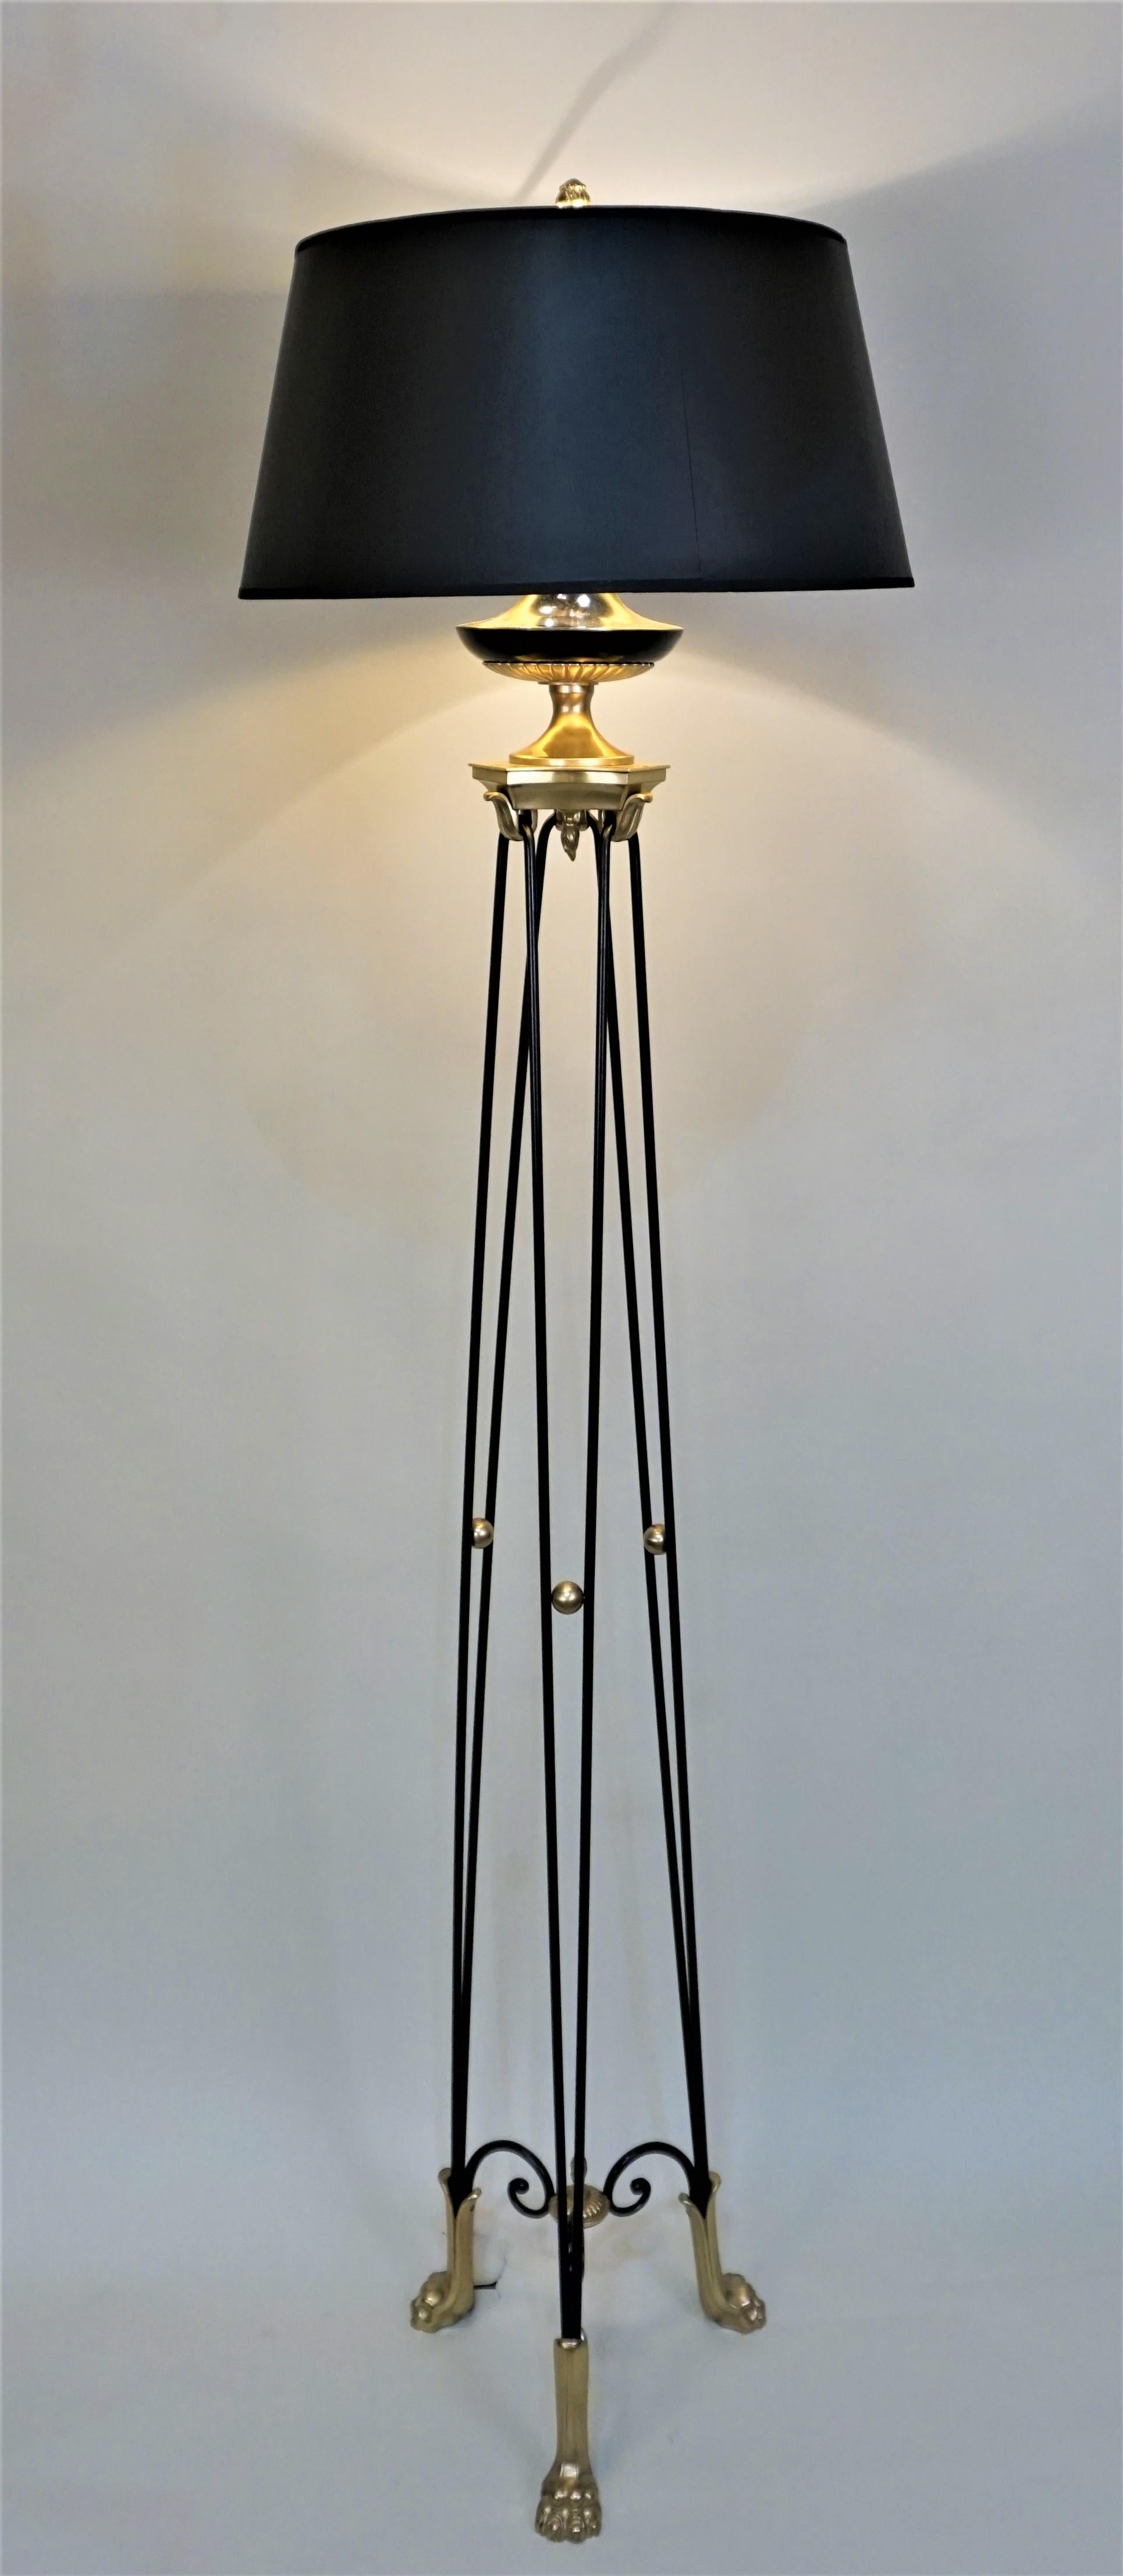 Elegant 1950s Empire style bronze claw foot floor lamp modified with adjustable double socket and fitted with black lampshade.